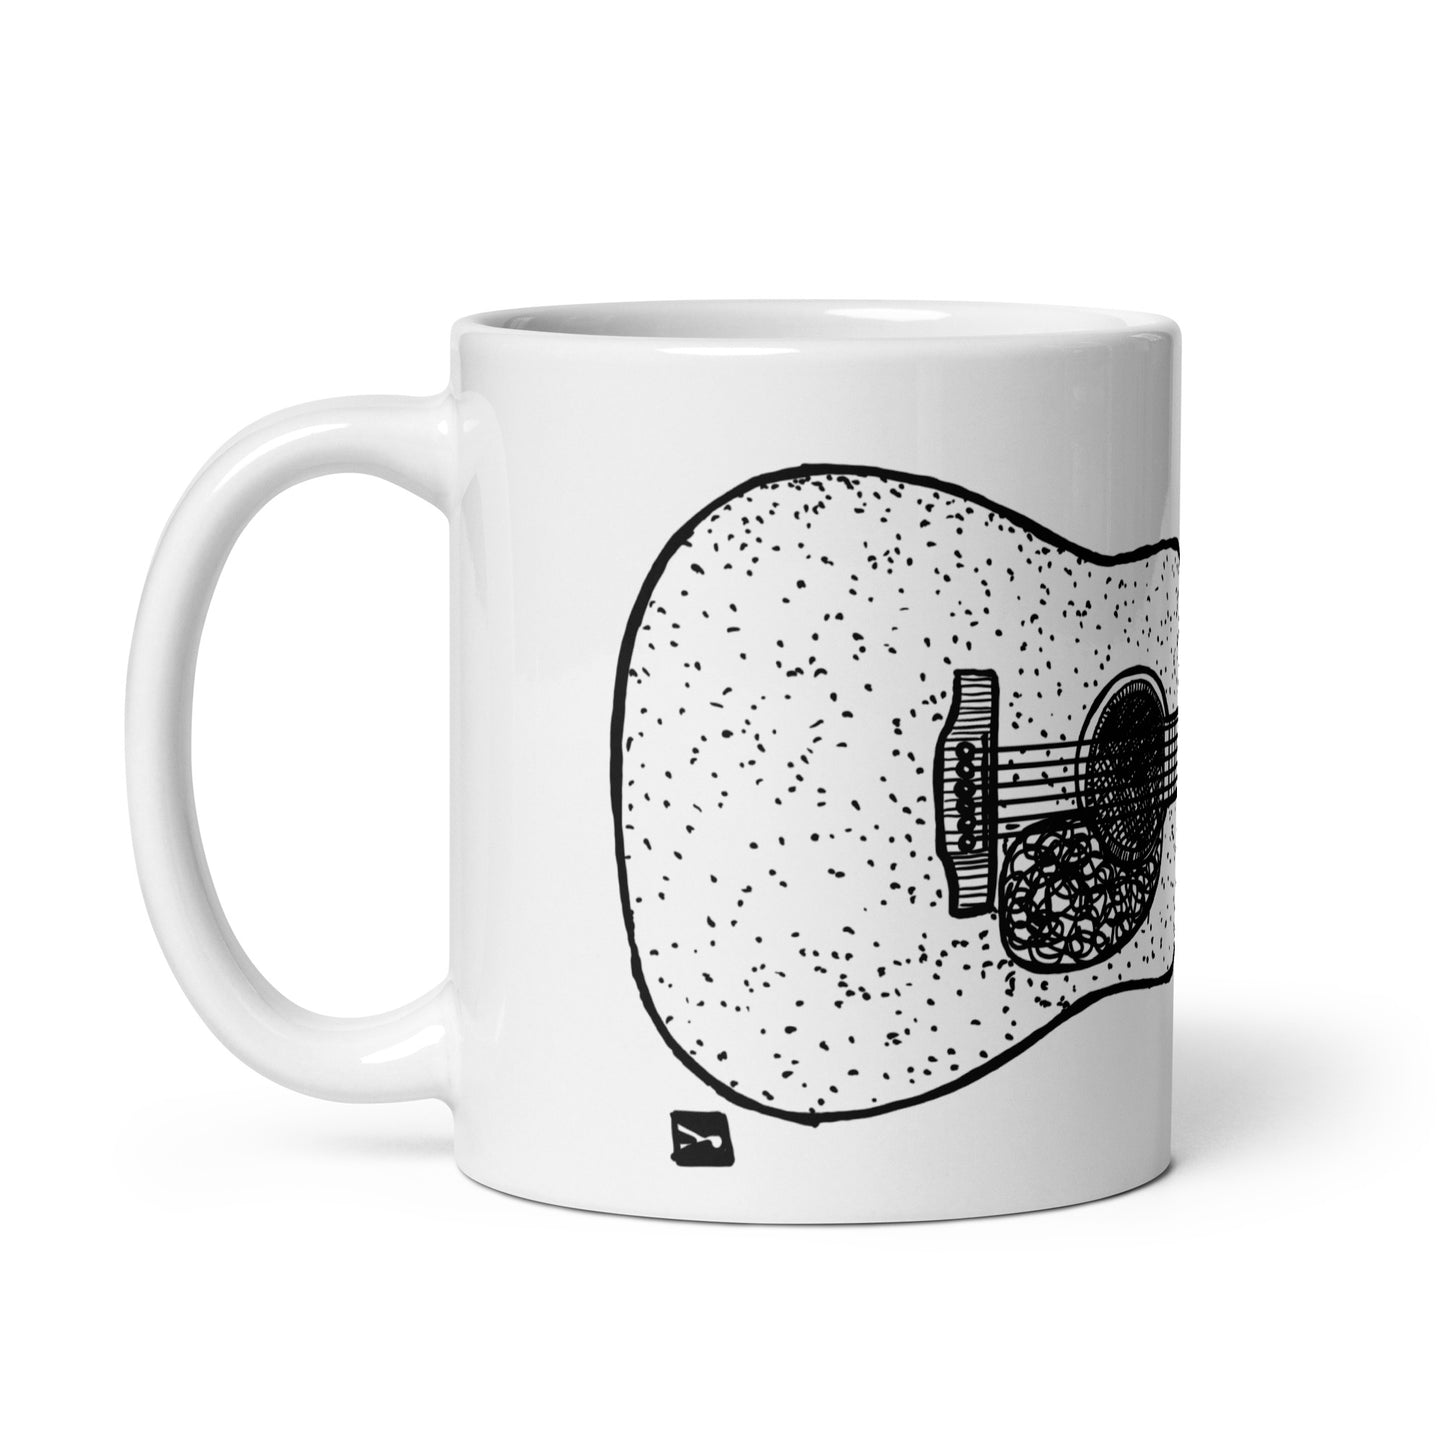 BellavanceInk: Coffee Mug With A Vintage Acoustic Guitar D18 Martin Style Musical Instrument Pen And Ink Drawing